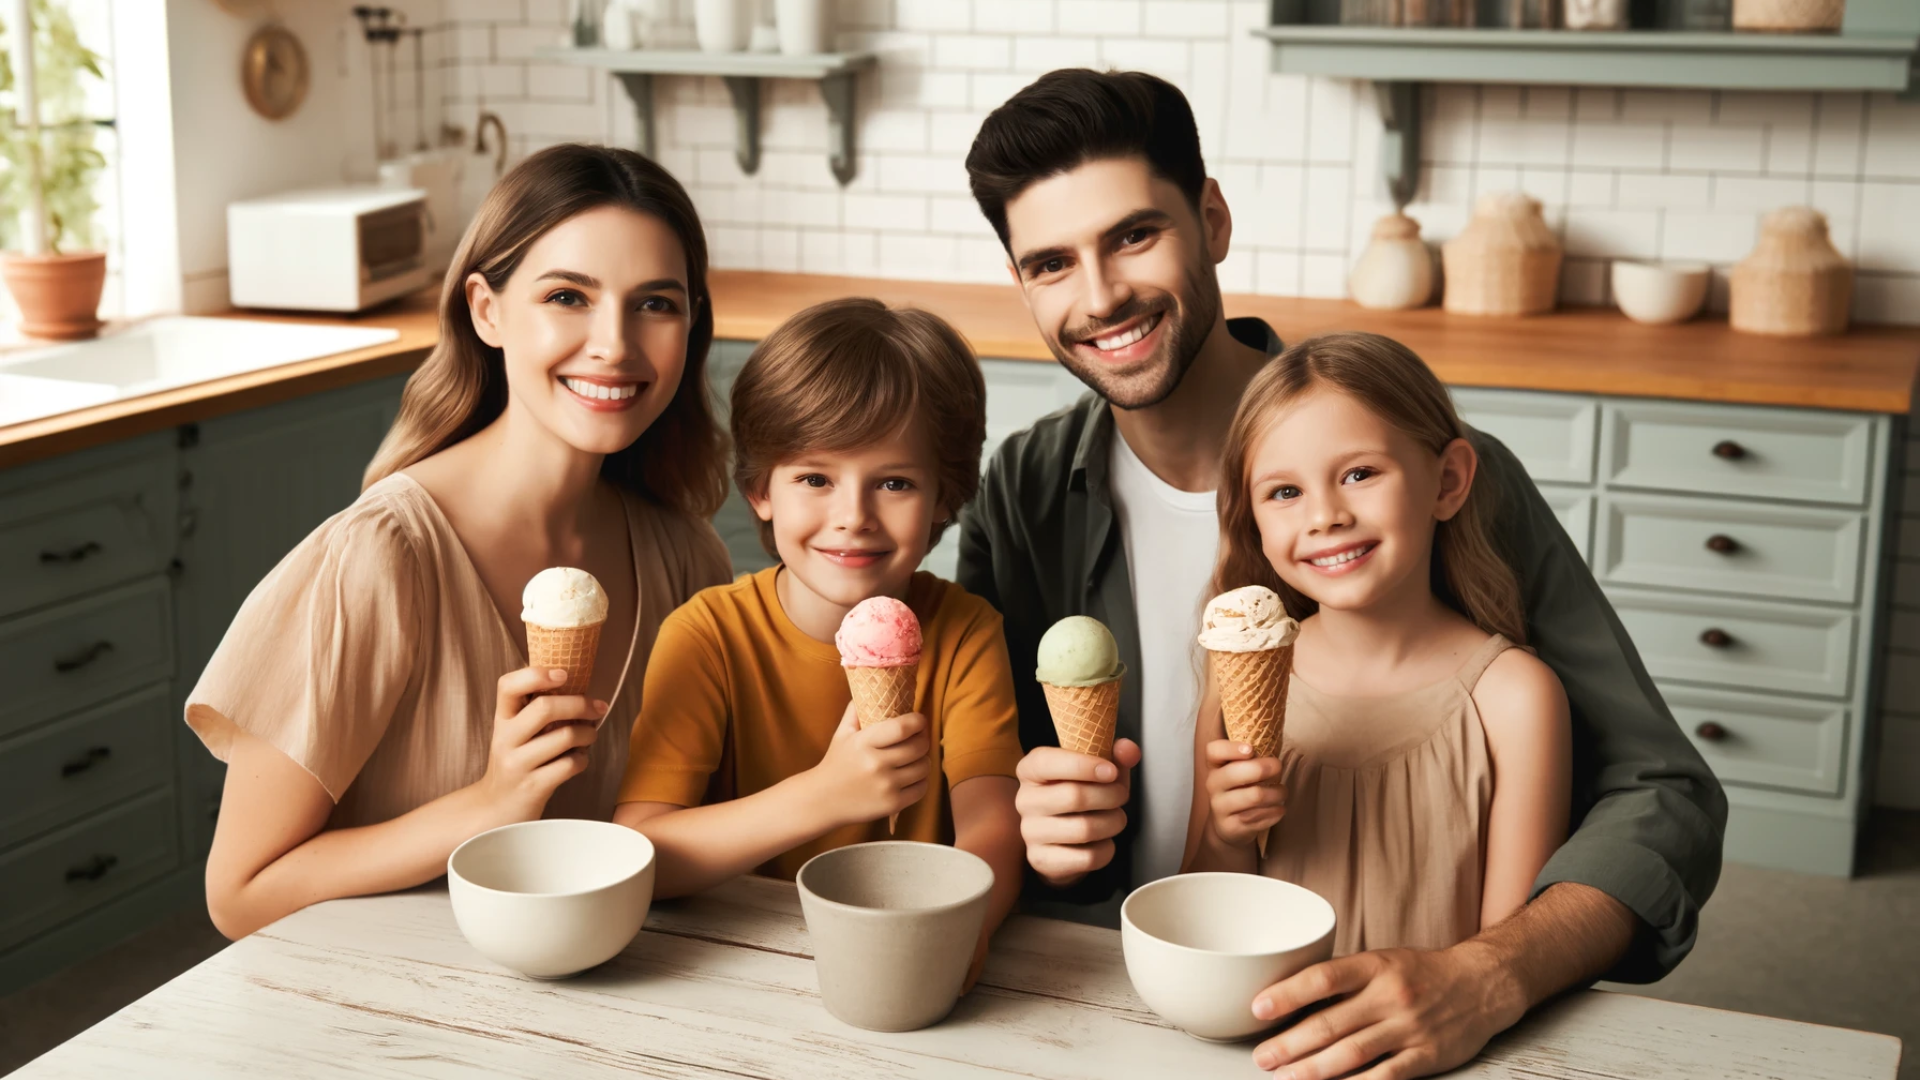 A family enjoys eating ice cream on a summer day.